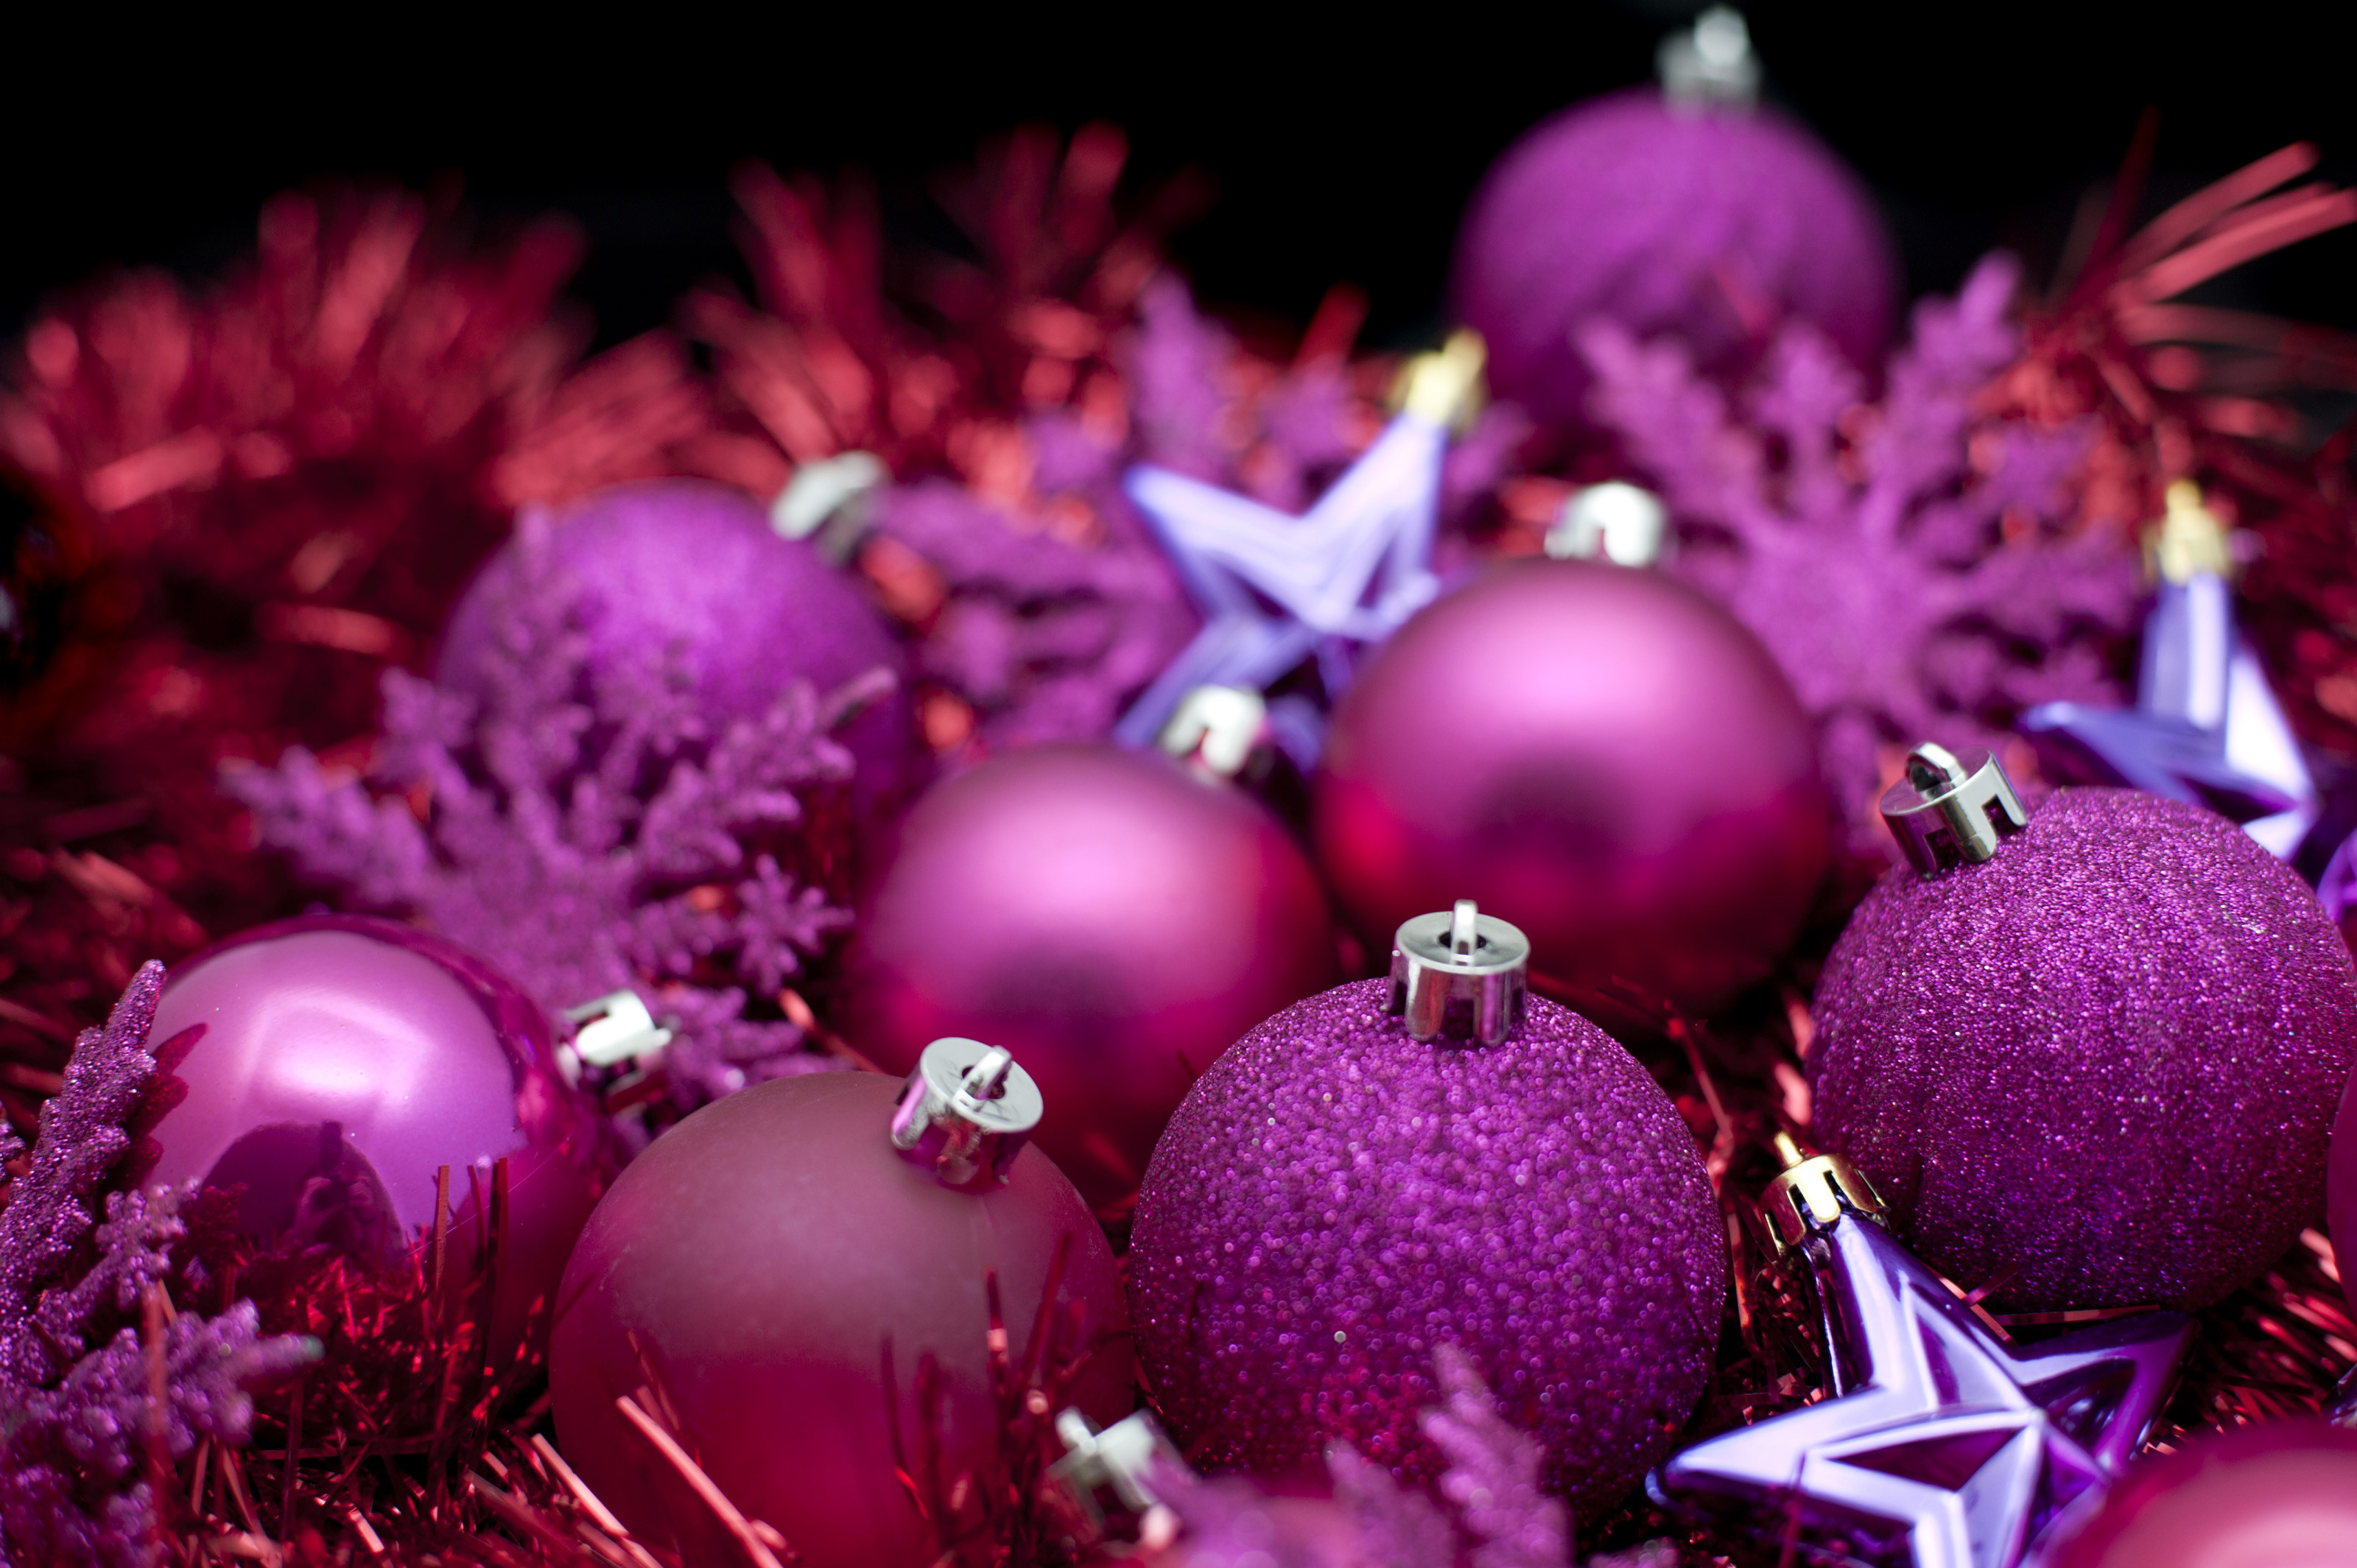 3200x2129 Free stock photo of Purple Christmas celebration with a variety of  ornaments, baubles and tinsel in random array for your festive background